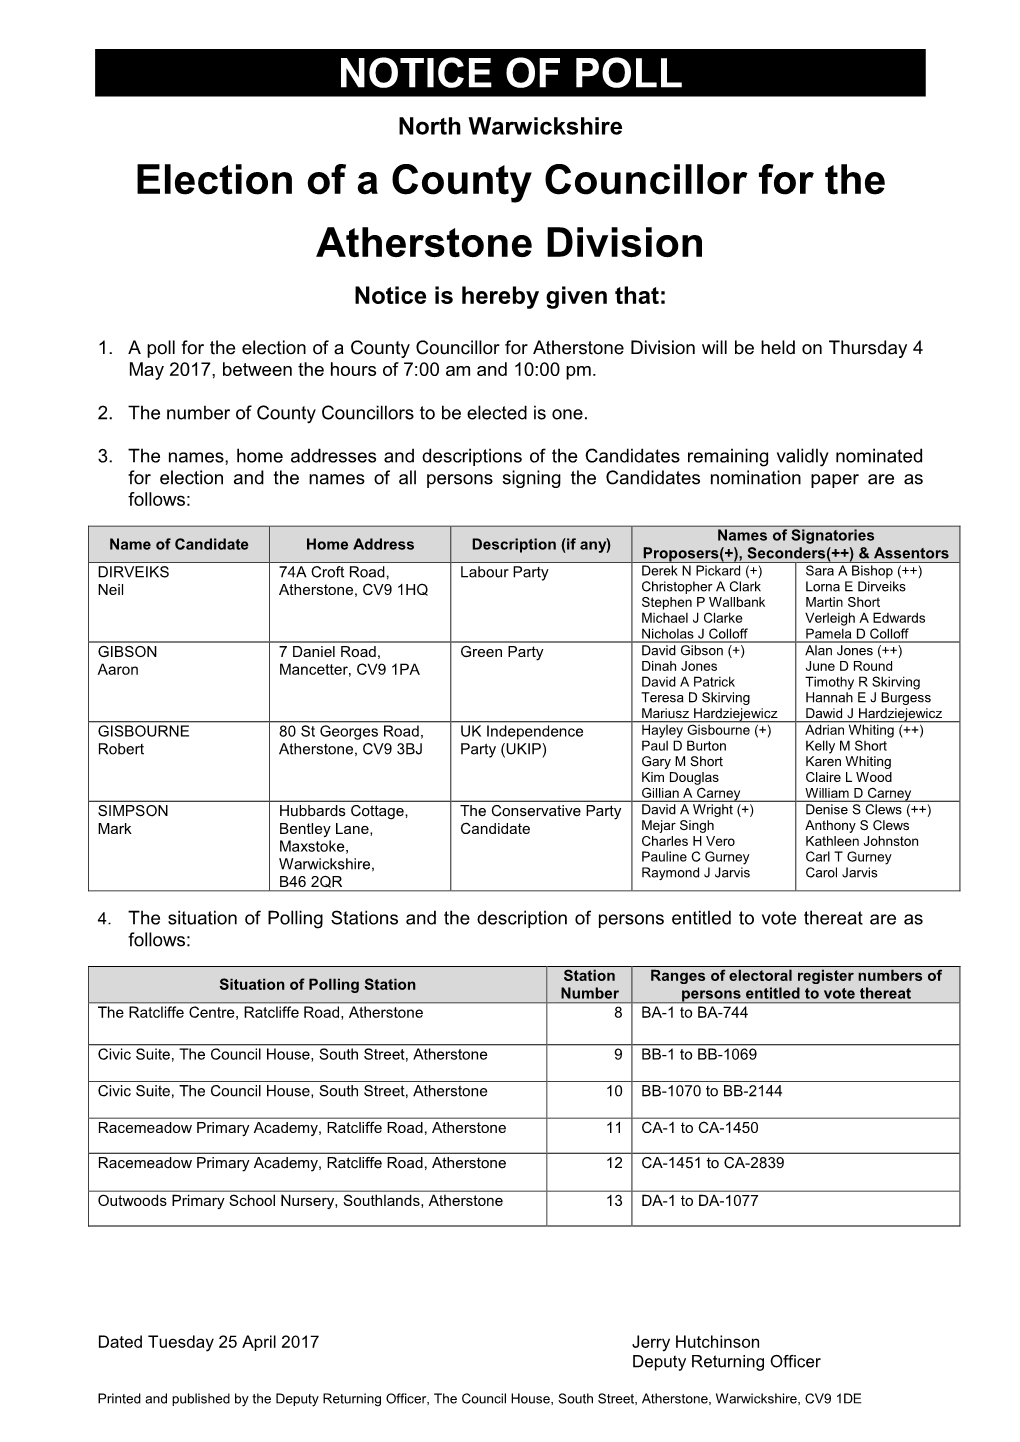 NOTICE of POLL Election of a County Councillor for The